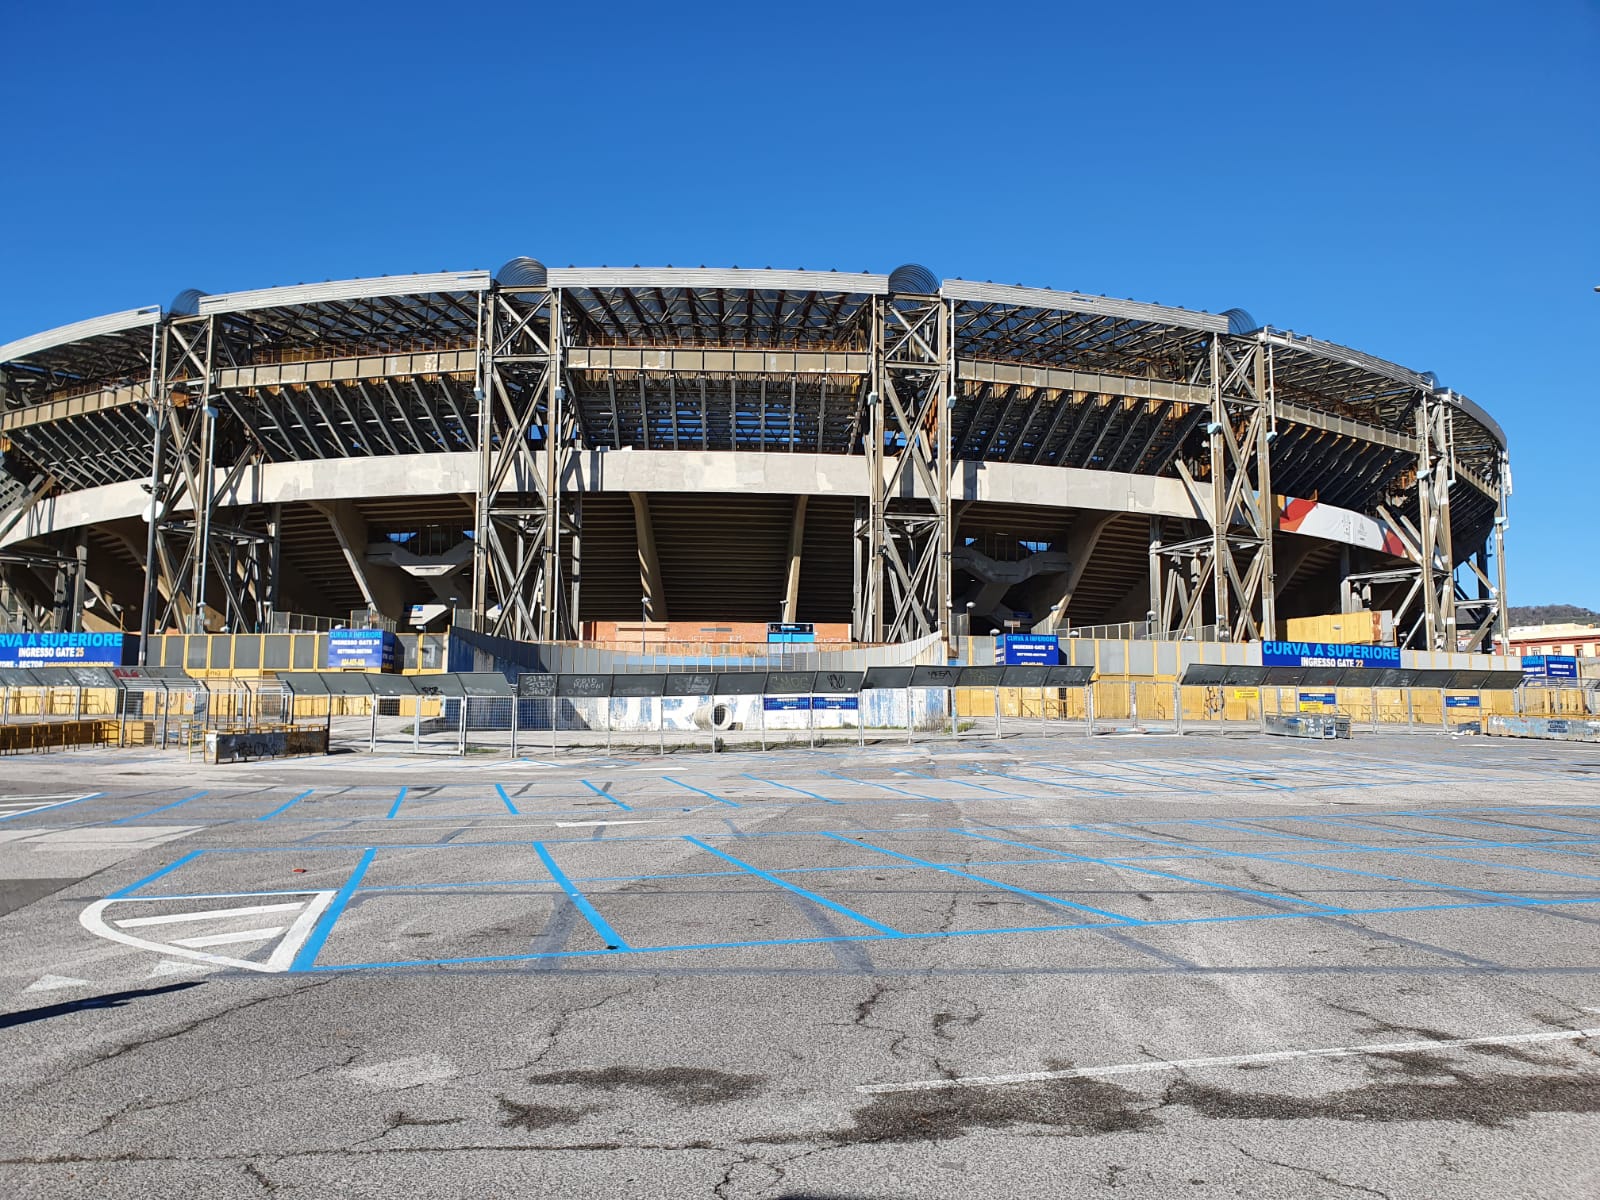 Seen from the outside, the San Paolo Stadium in Naples is not exactly the state of the art in architecture, but still maintains an undeniable charm despite its 64 years of age (Photo: https://gianlucadimarzio.com)